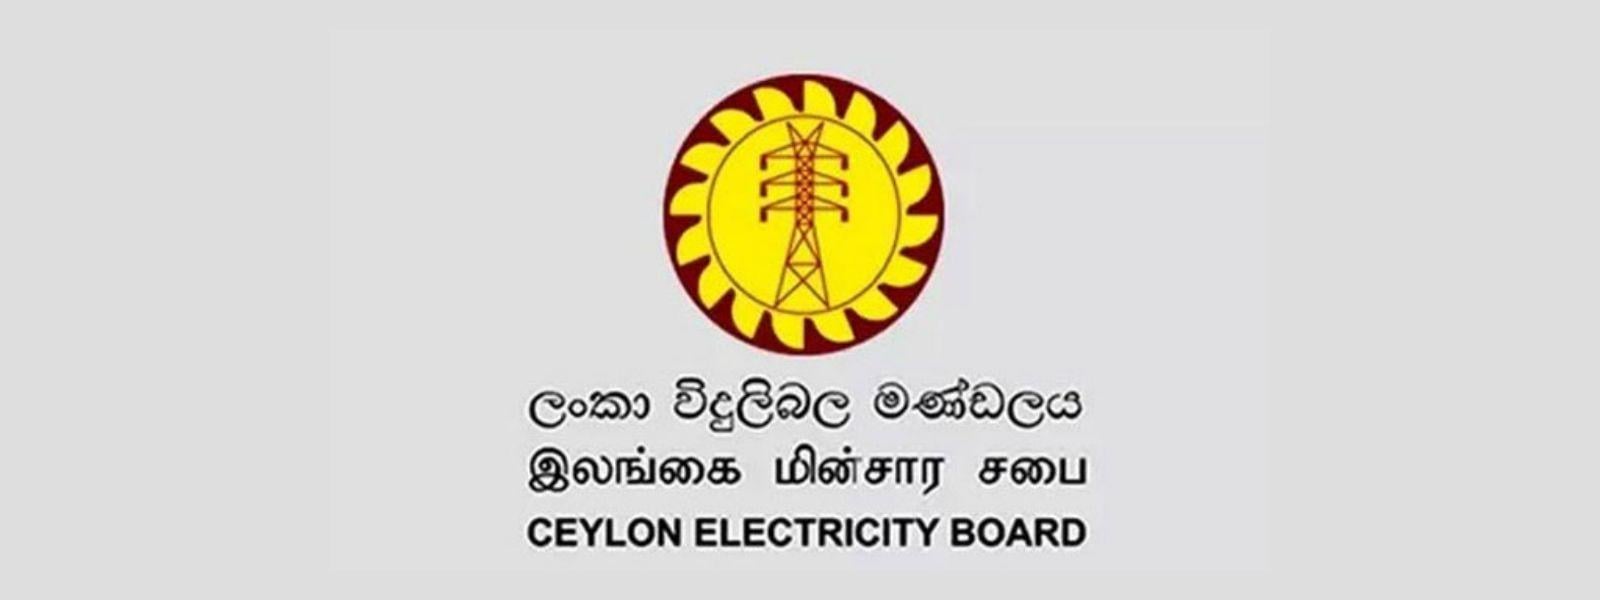 CEB Logo - CEB requests public to inform authorities of power failures